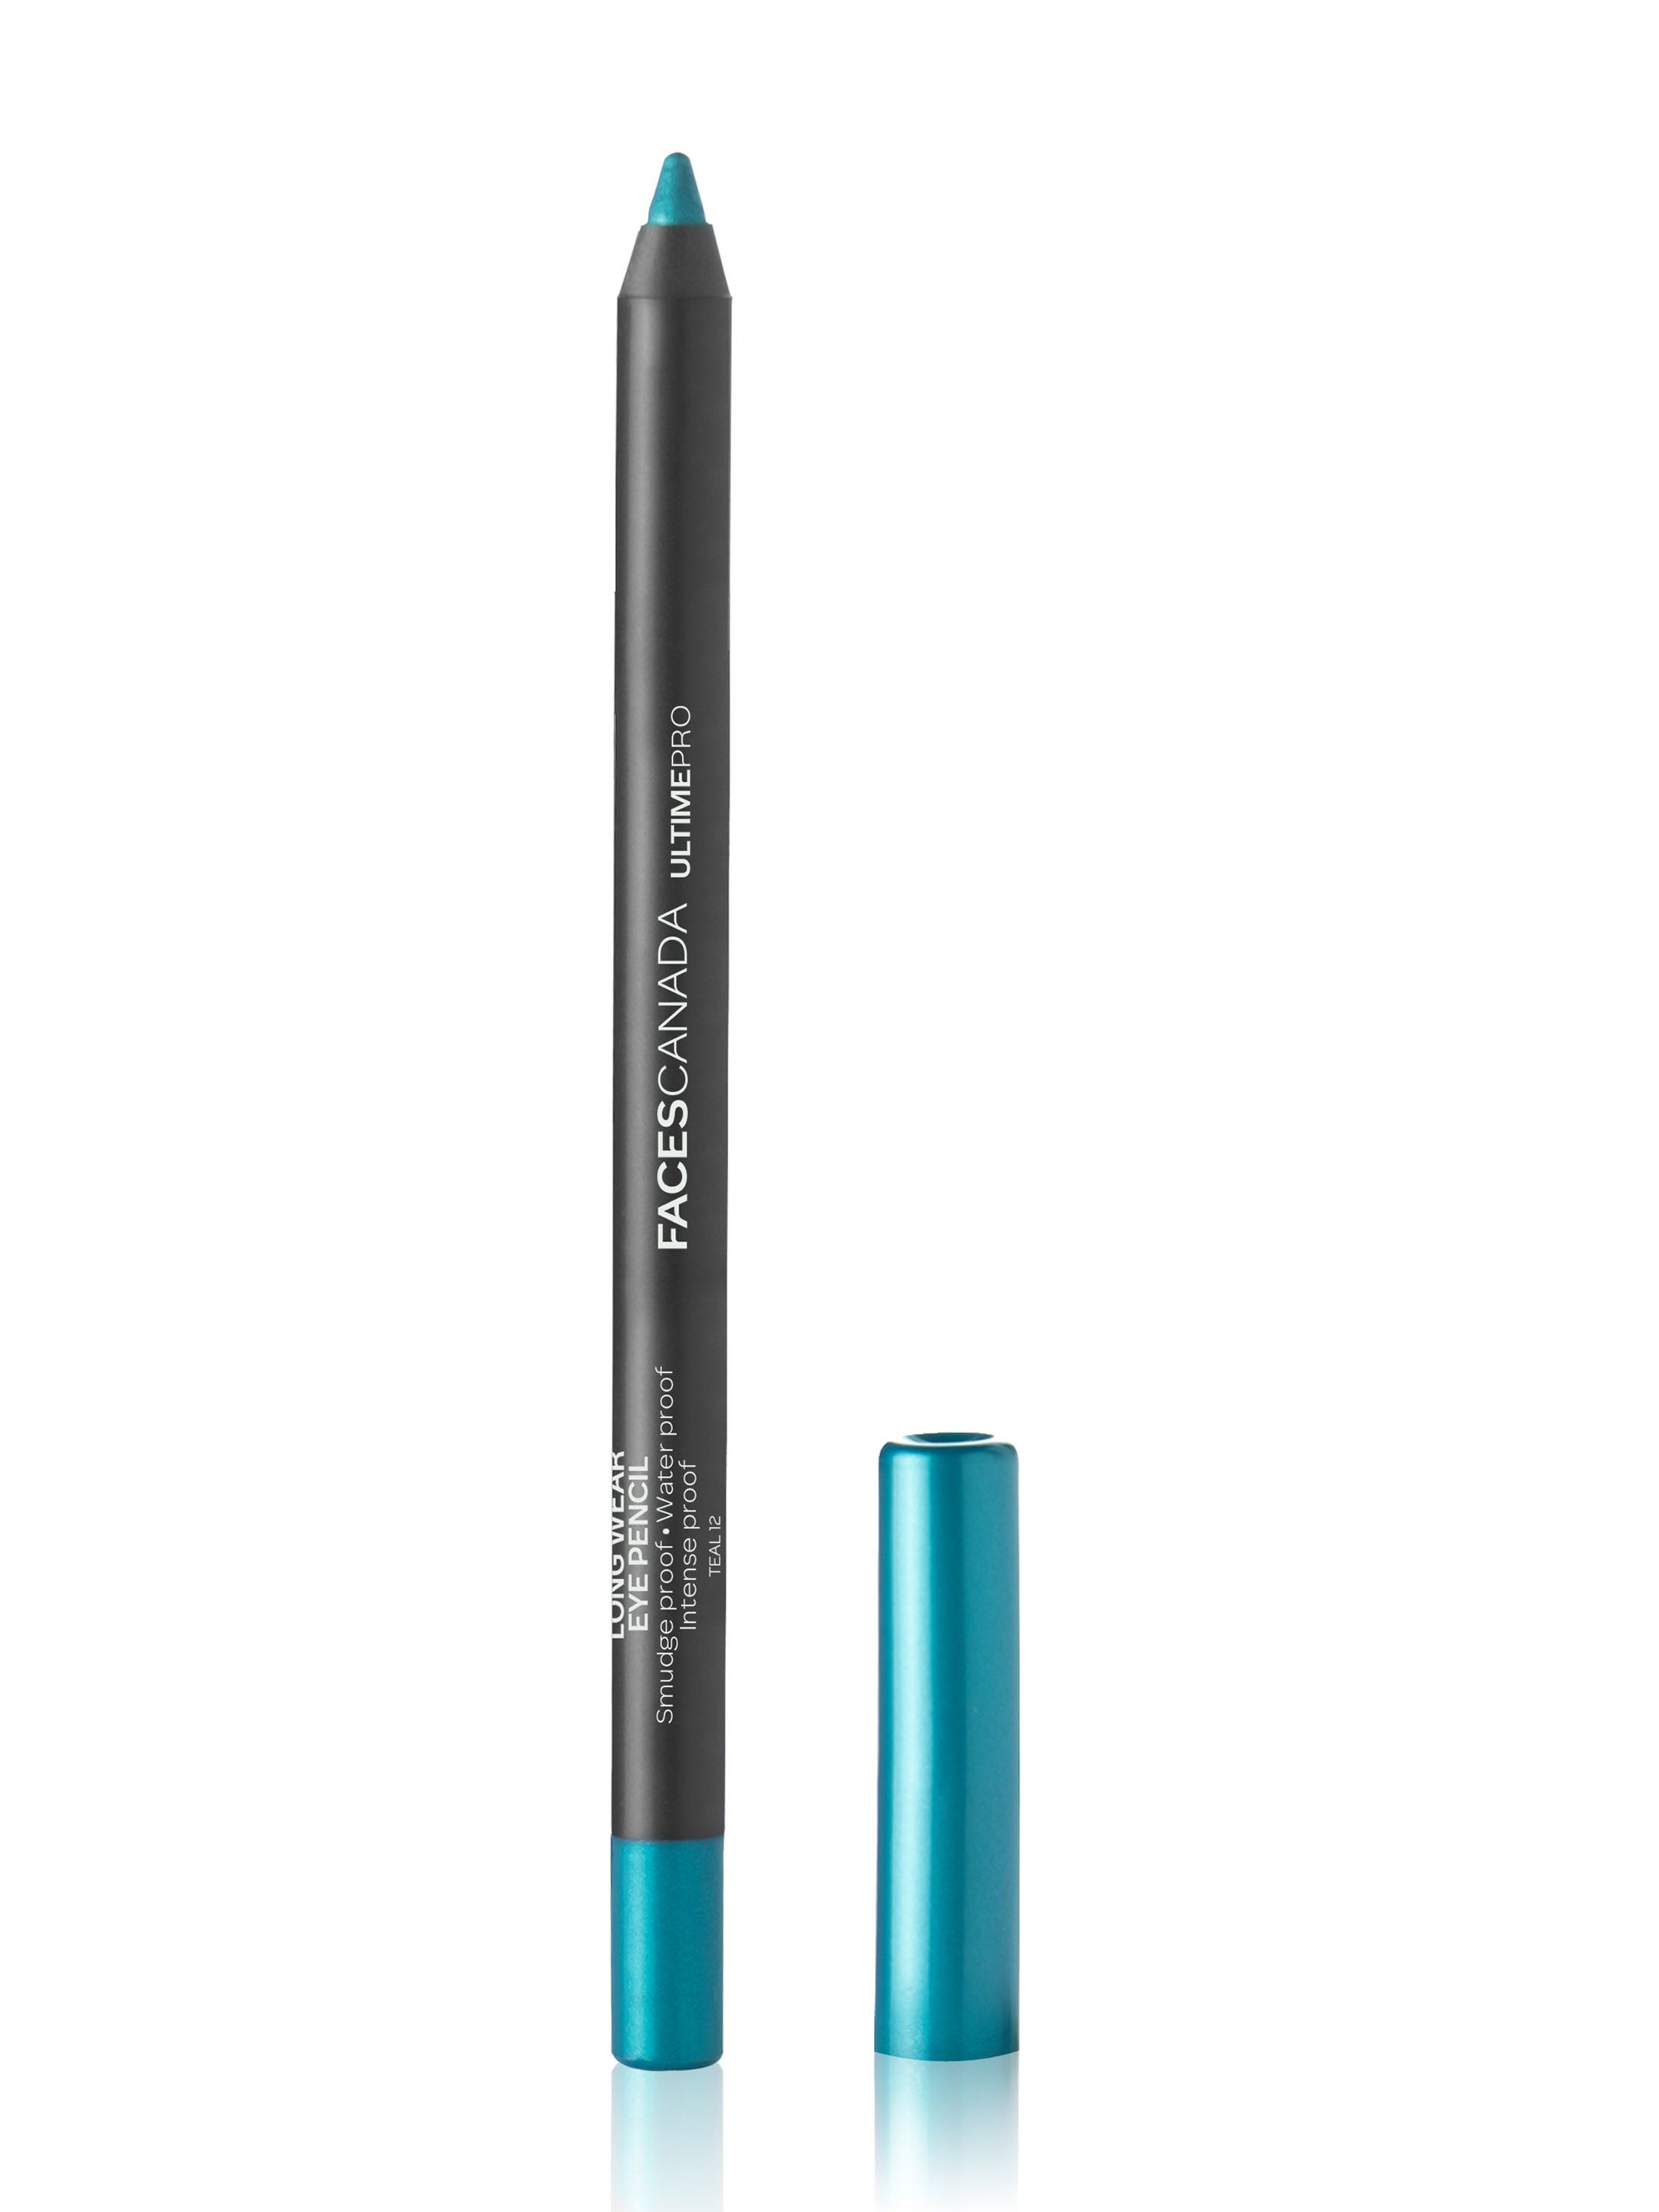 FACES CANADA Longwear Eyepencil - Teal 12 Price in India